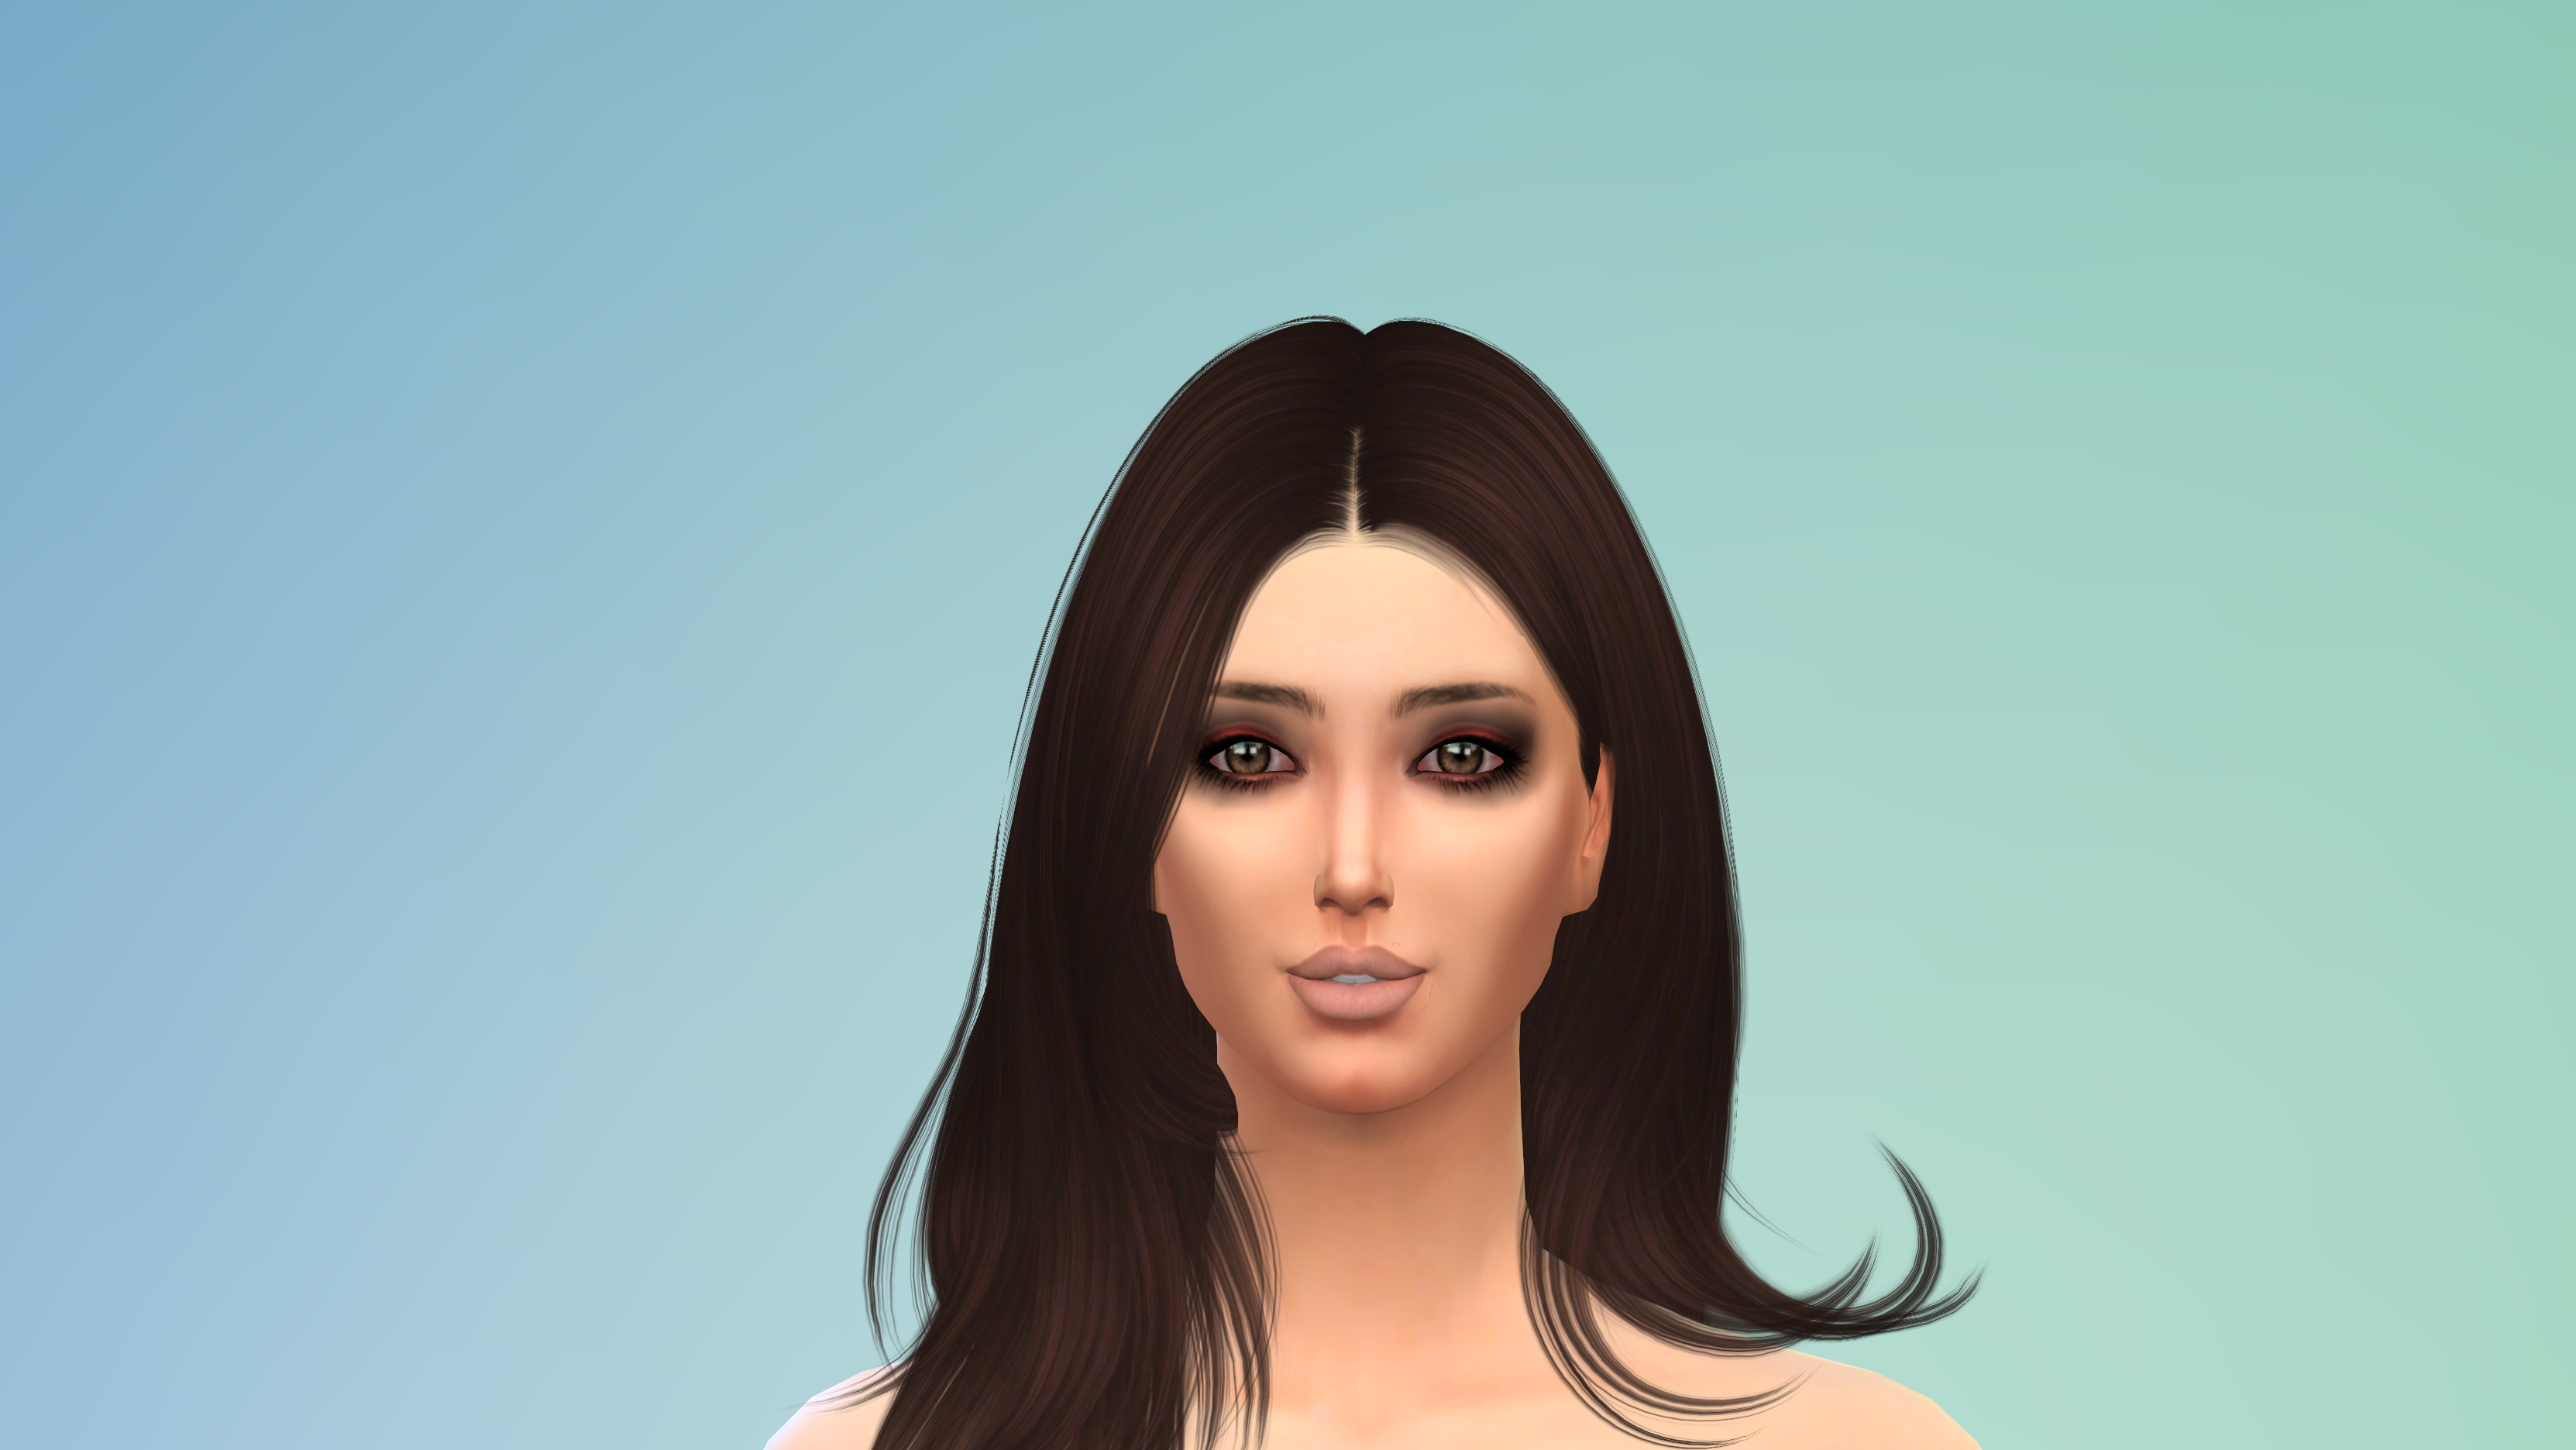 I Have A Humble Request About A Porn Star Request And Find The Sims 4 